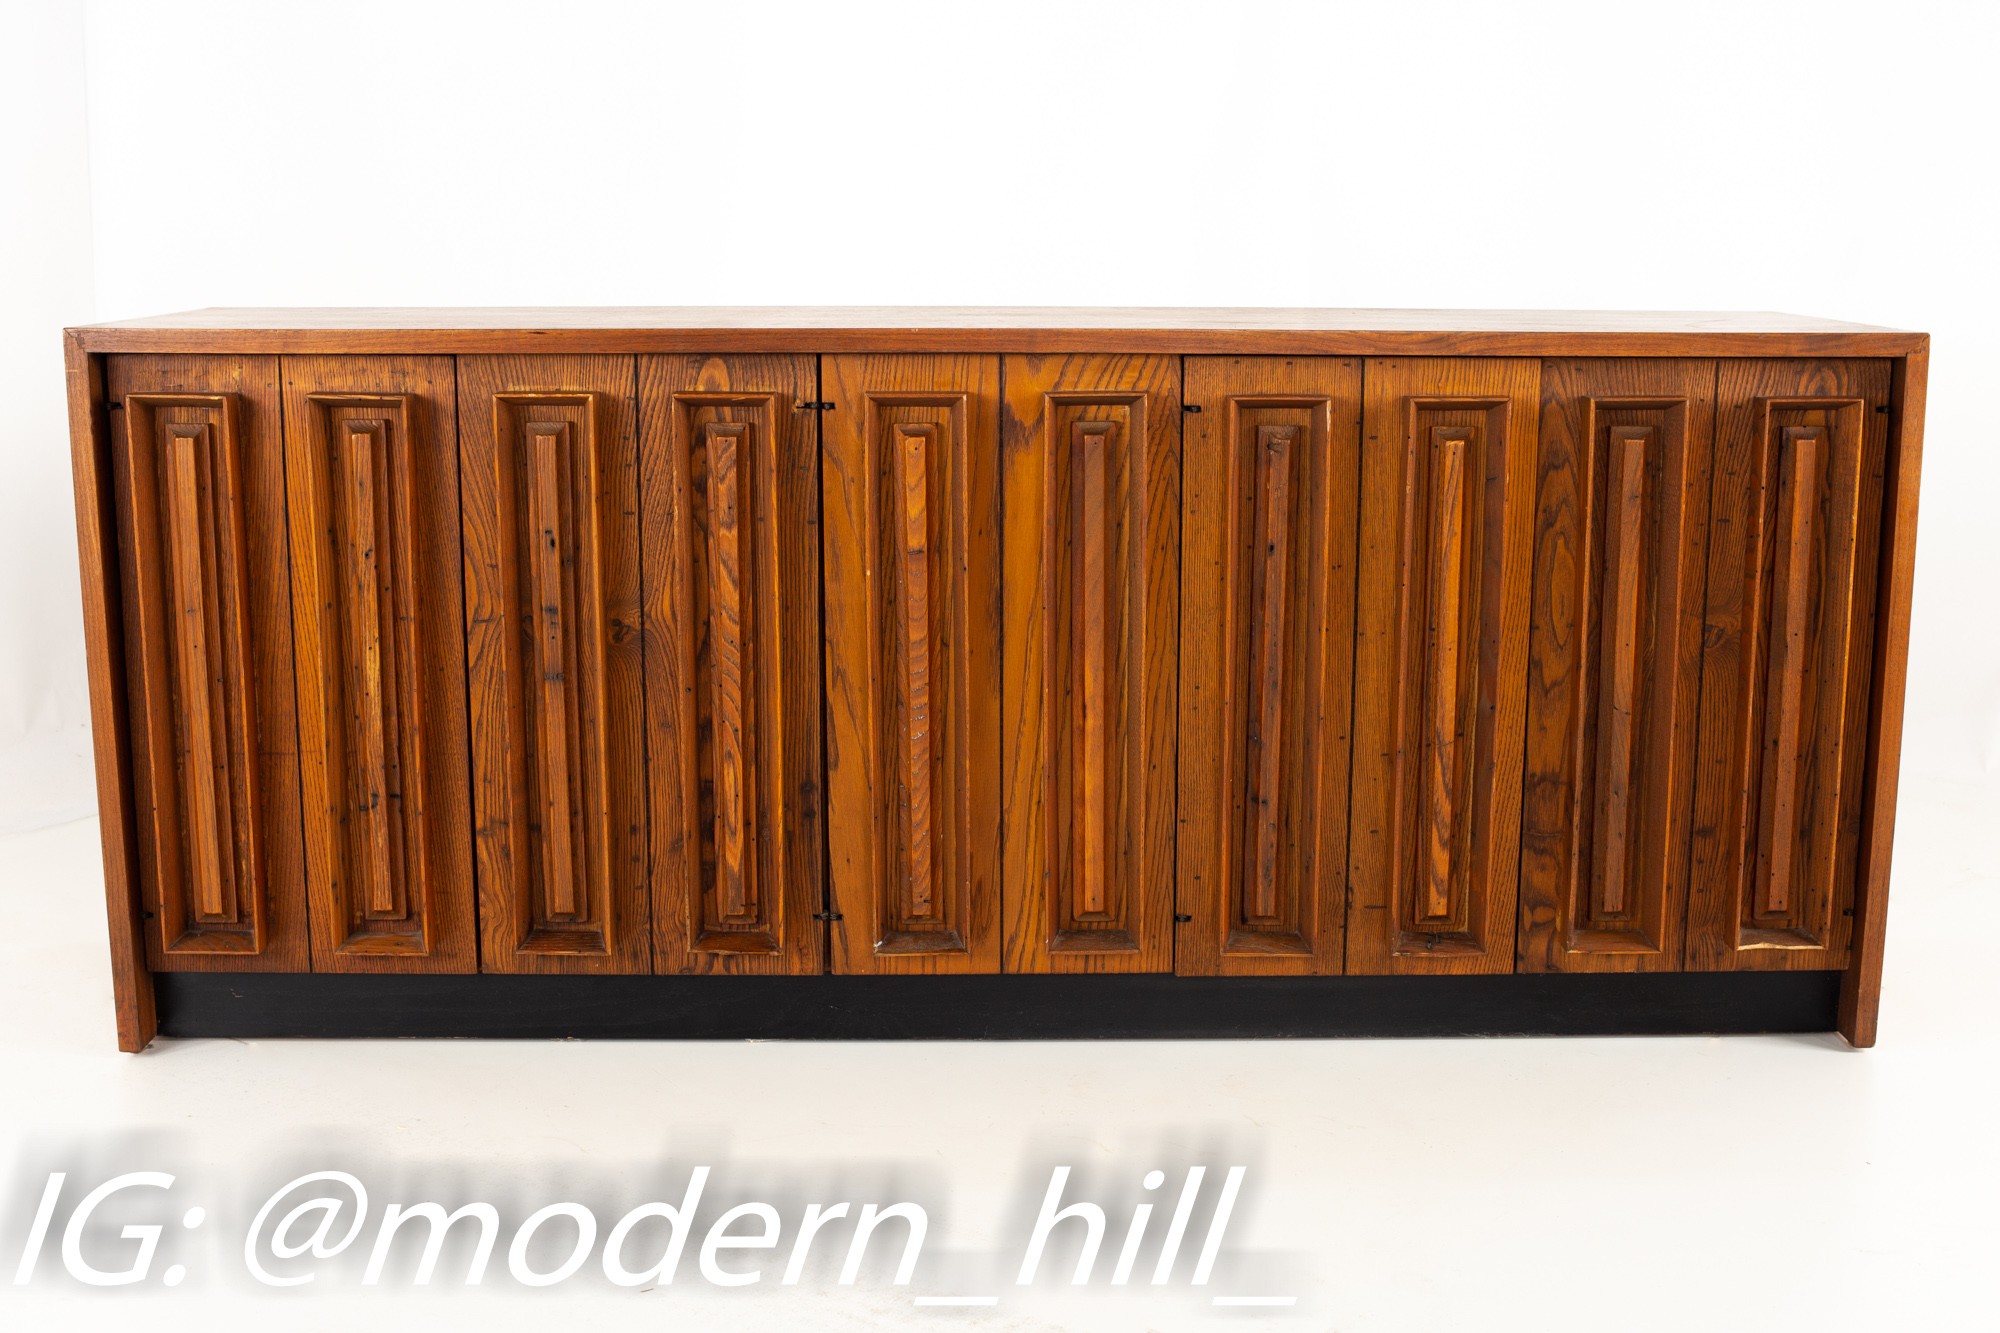 Dillingham Mid-century Pecky Cypress and Walnut Sideboard-credenza-buffet